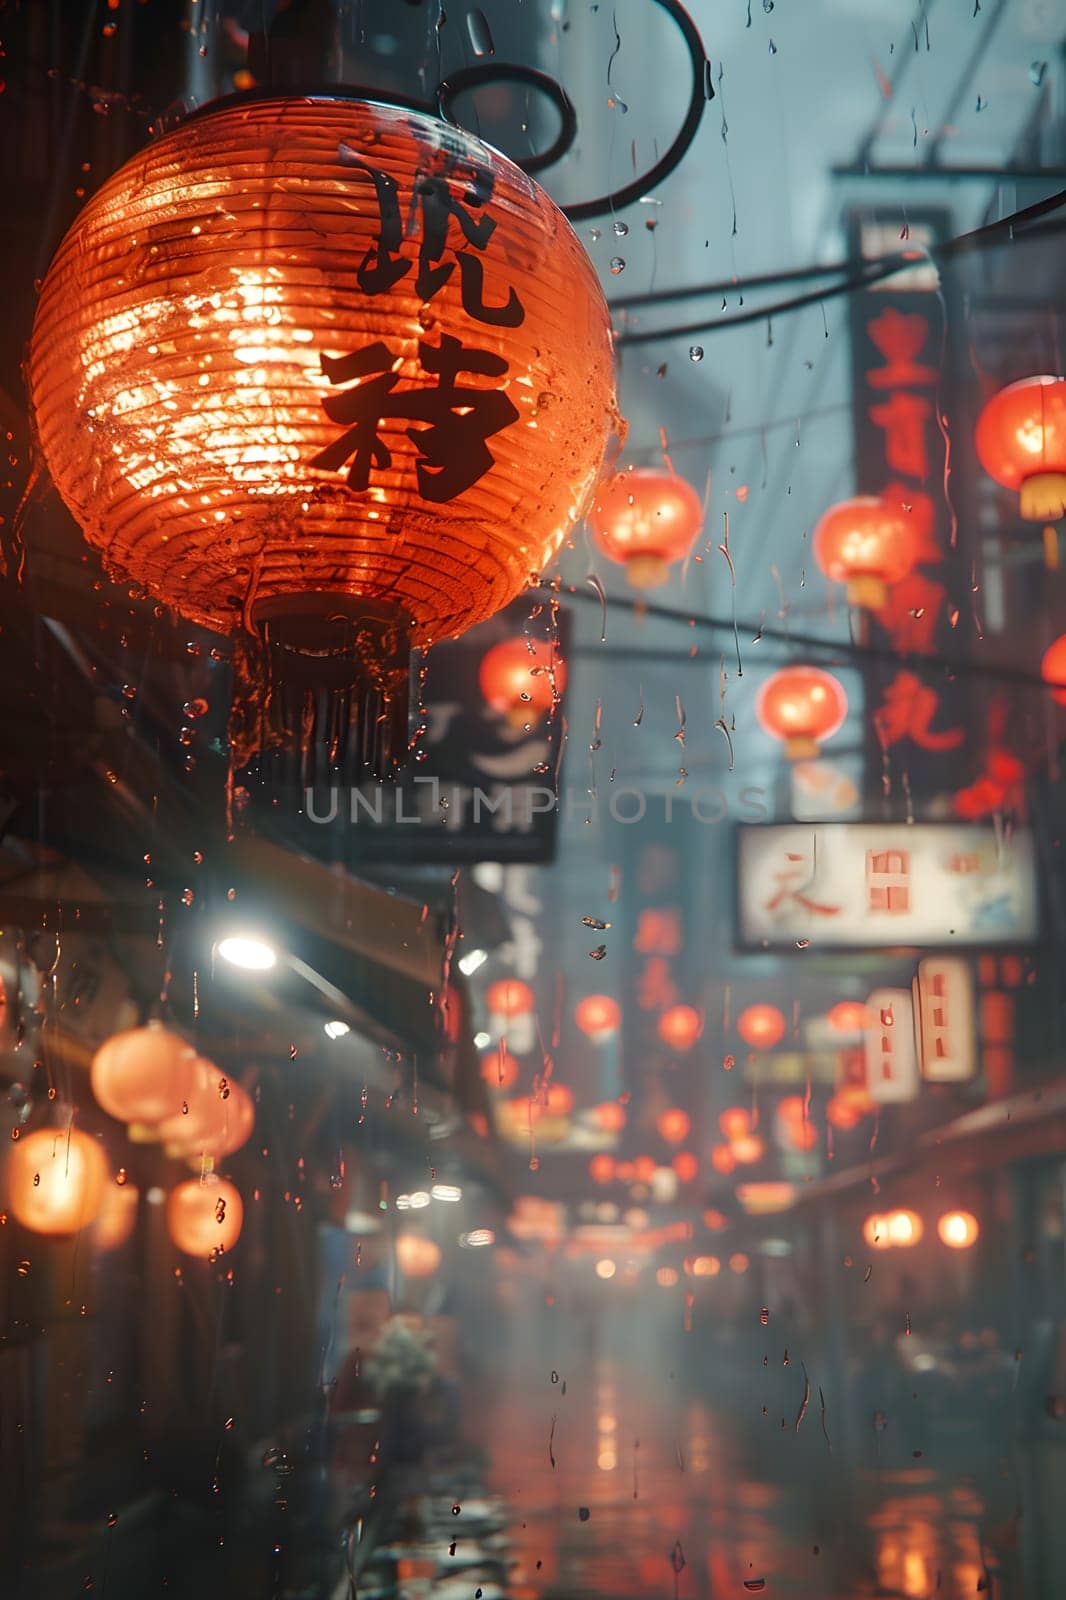 A row of amber lanterns hang from a pole on a city street, casting an orange tint with shades of tree shadows. The automotive lighting adds a warm glow amidst the electricity and gas lights